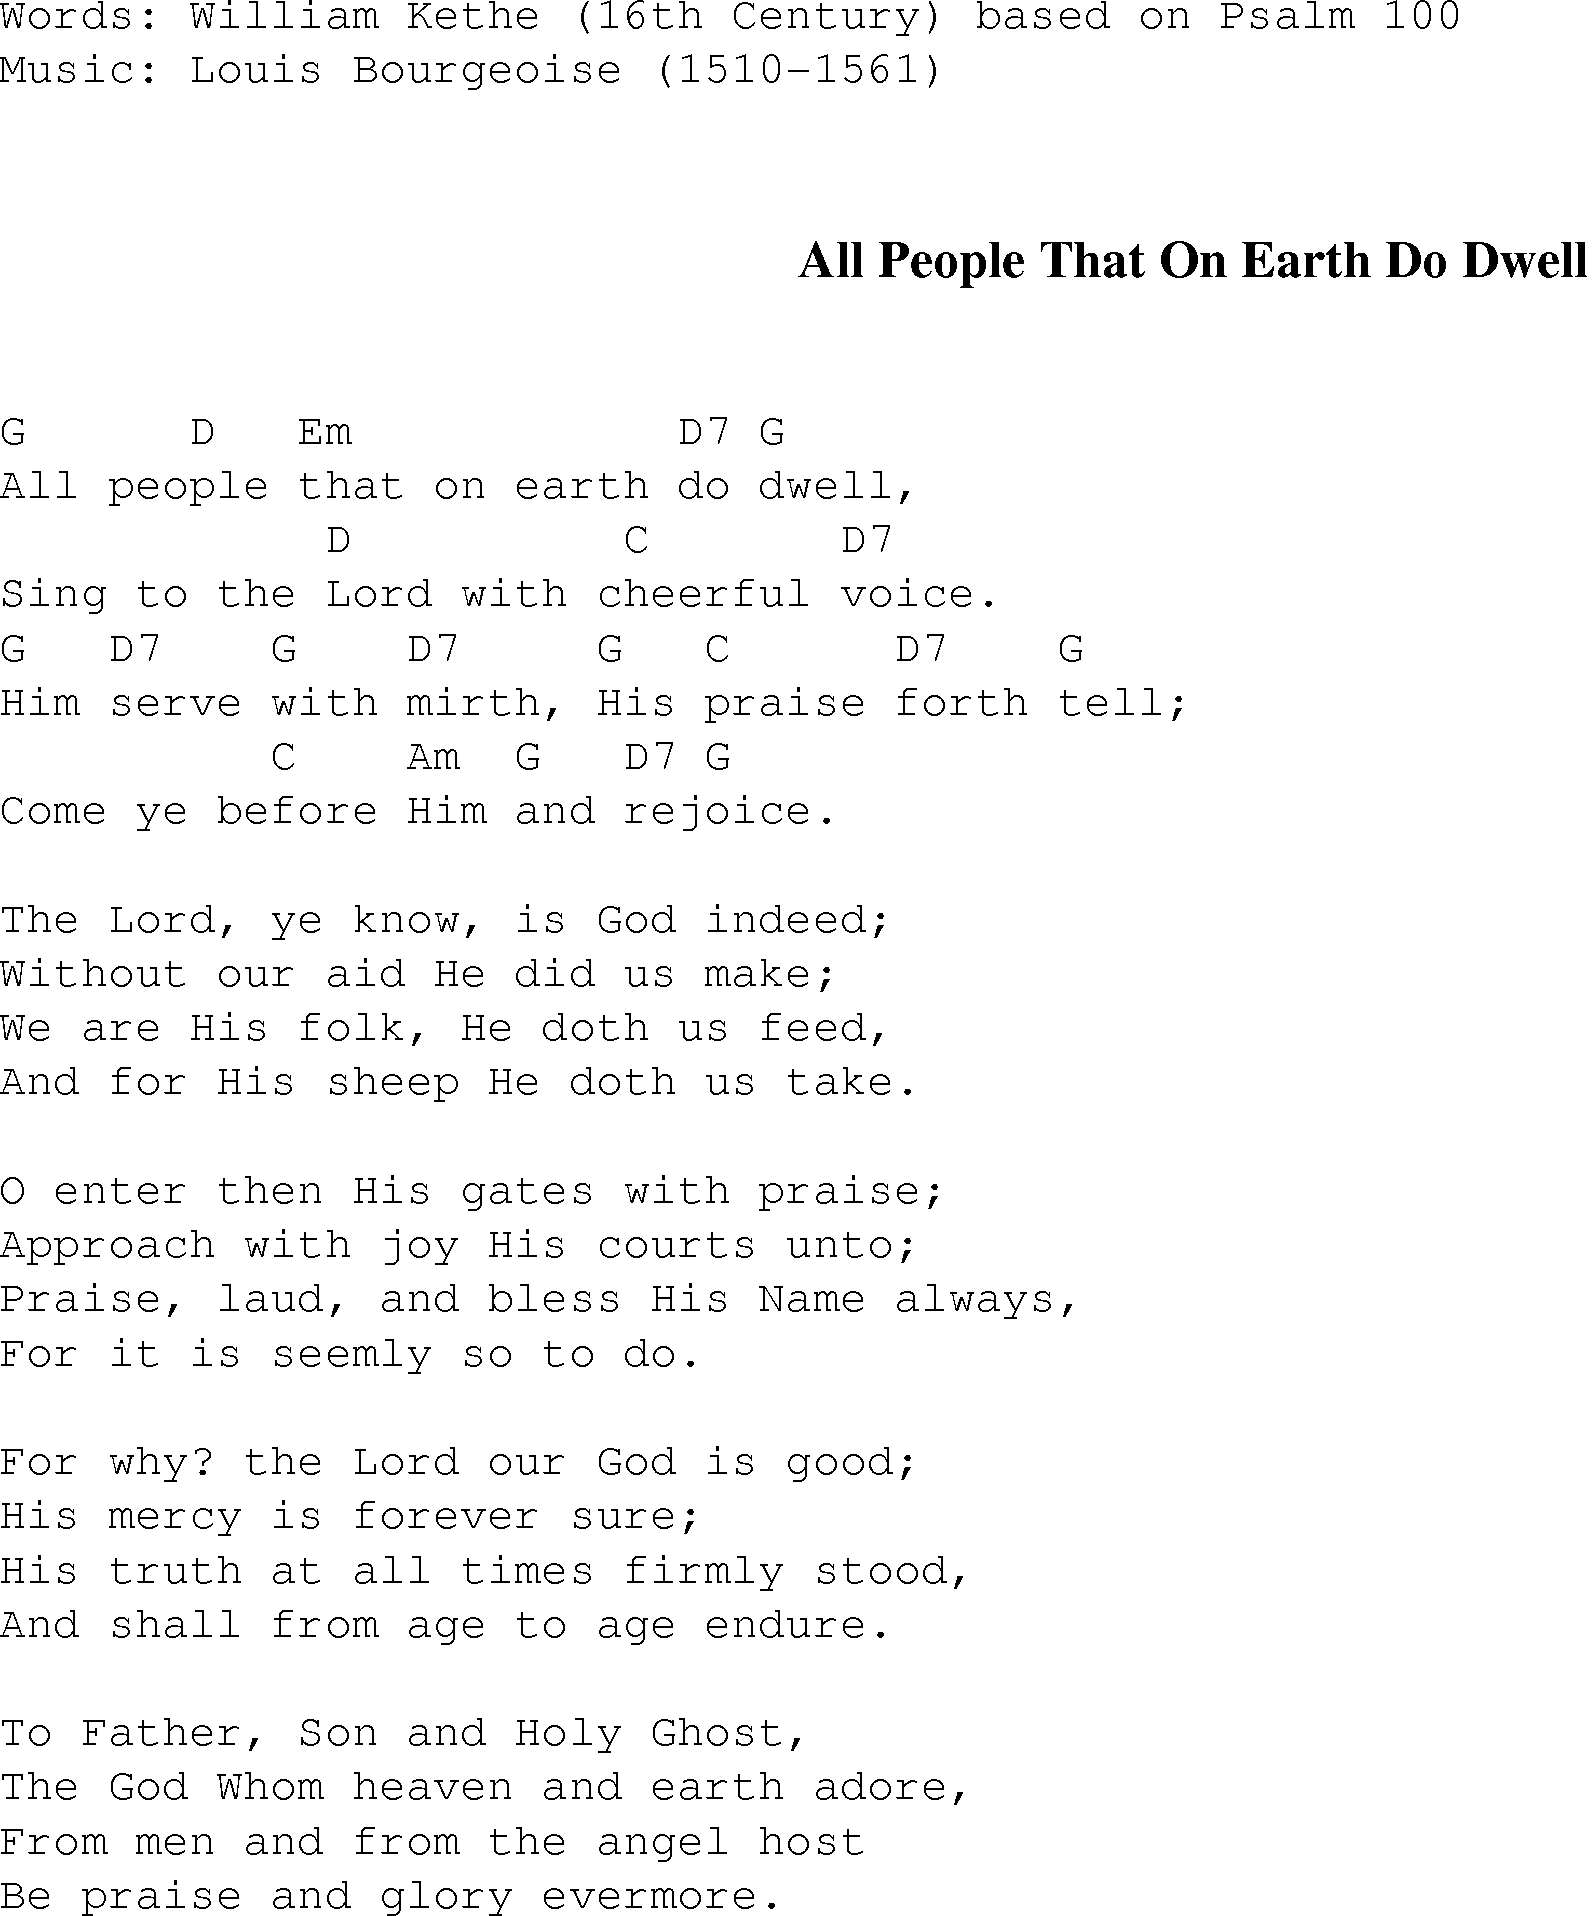 Gospel Song: all_people_that_on_earth_do_dwell, lyrics and chords.